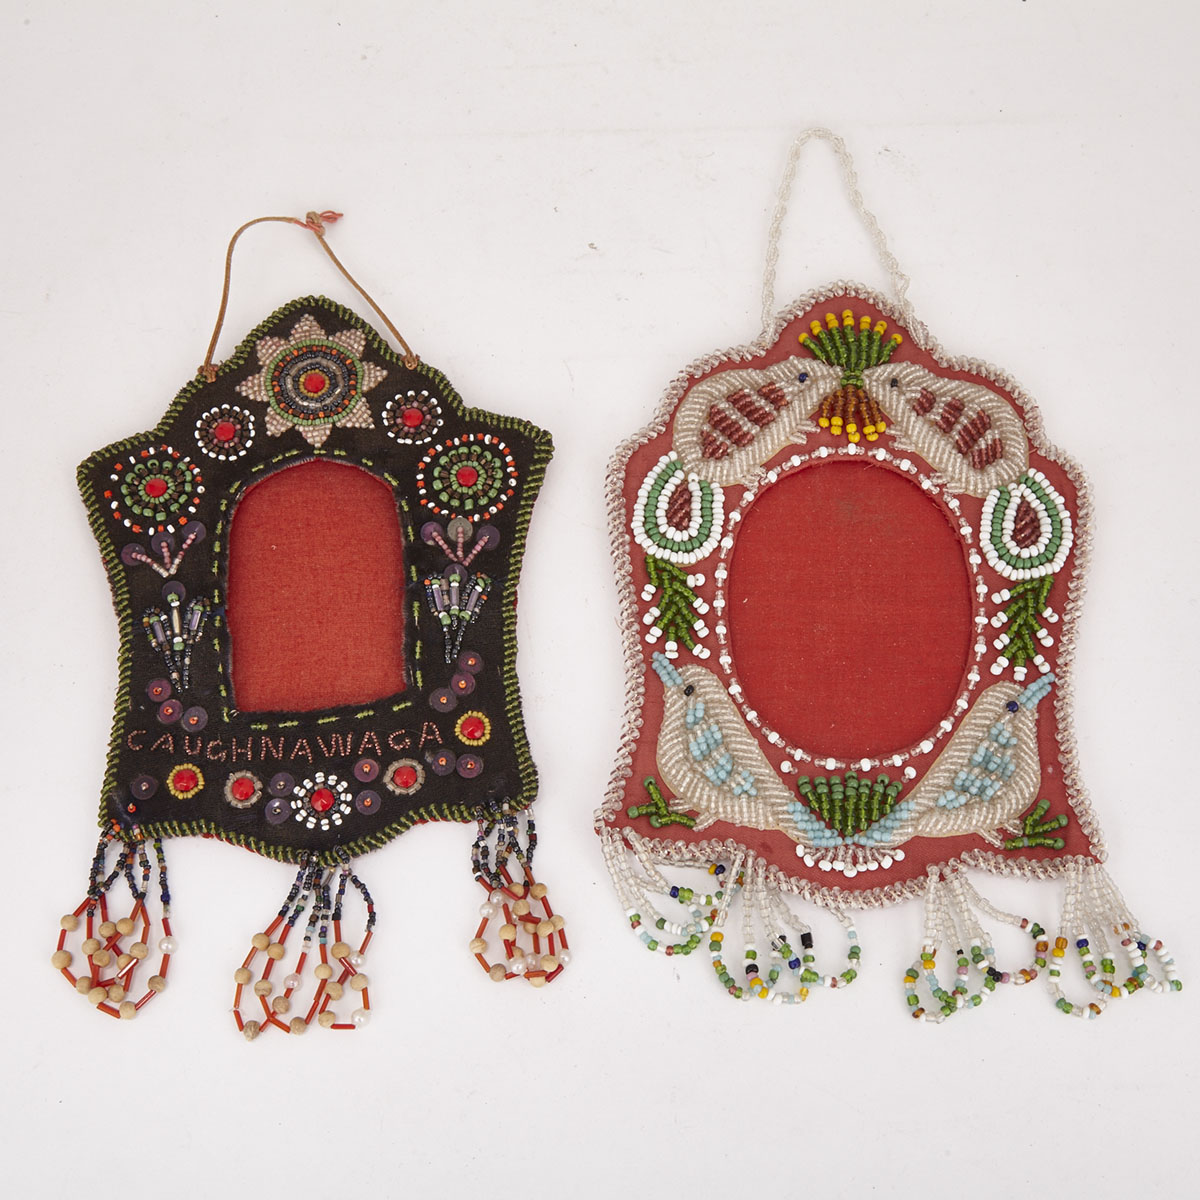 Two Iroquois Beaded Frames, early 20th century